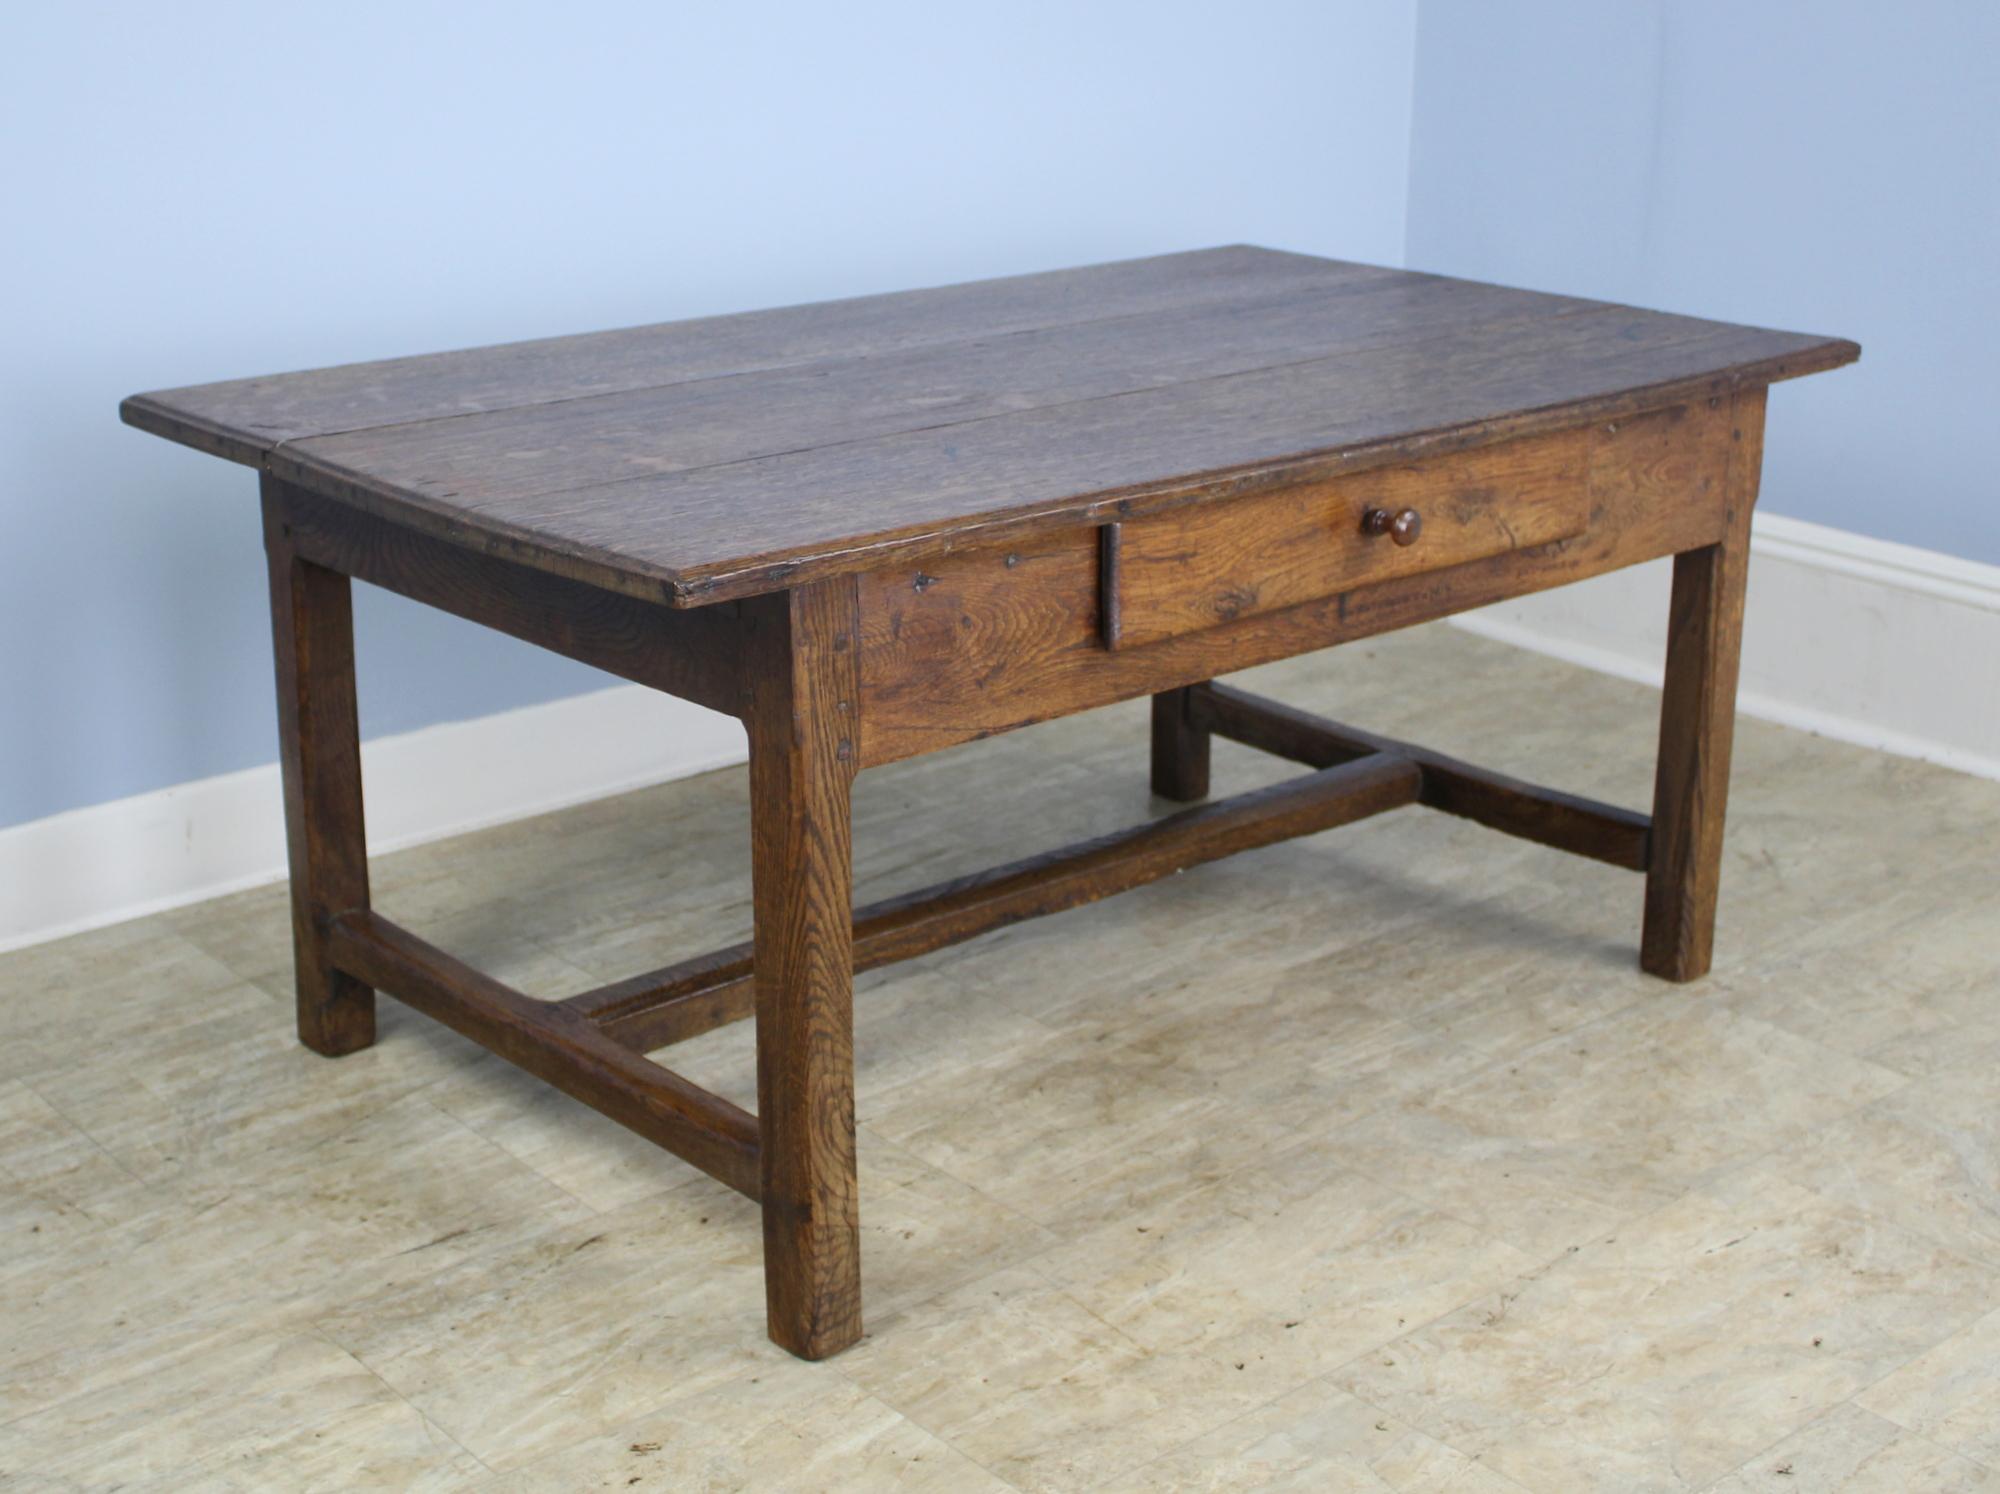 A nicely proportioned oak coffee table with a stretcher base. The wood has good color and patina and the single drawer adds a note of interest.